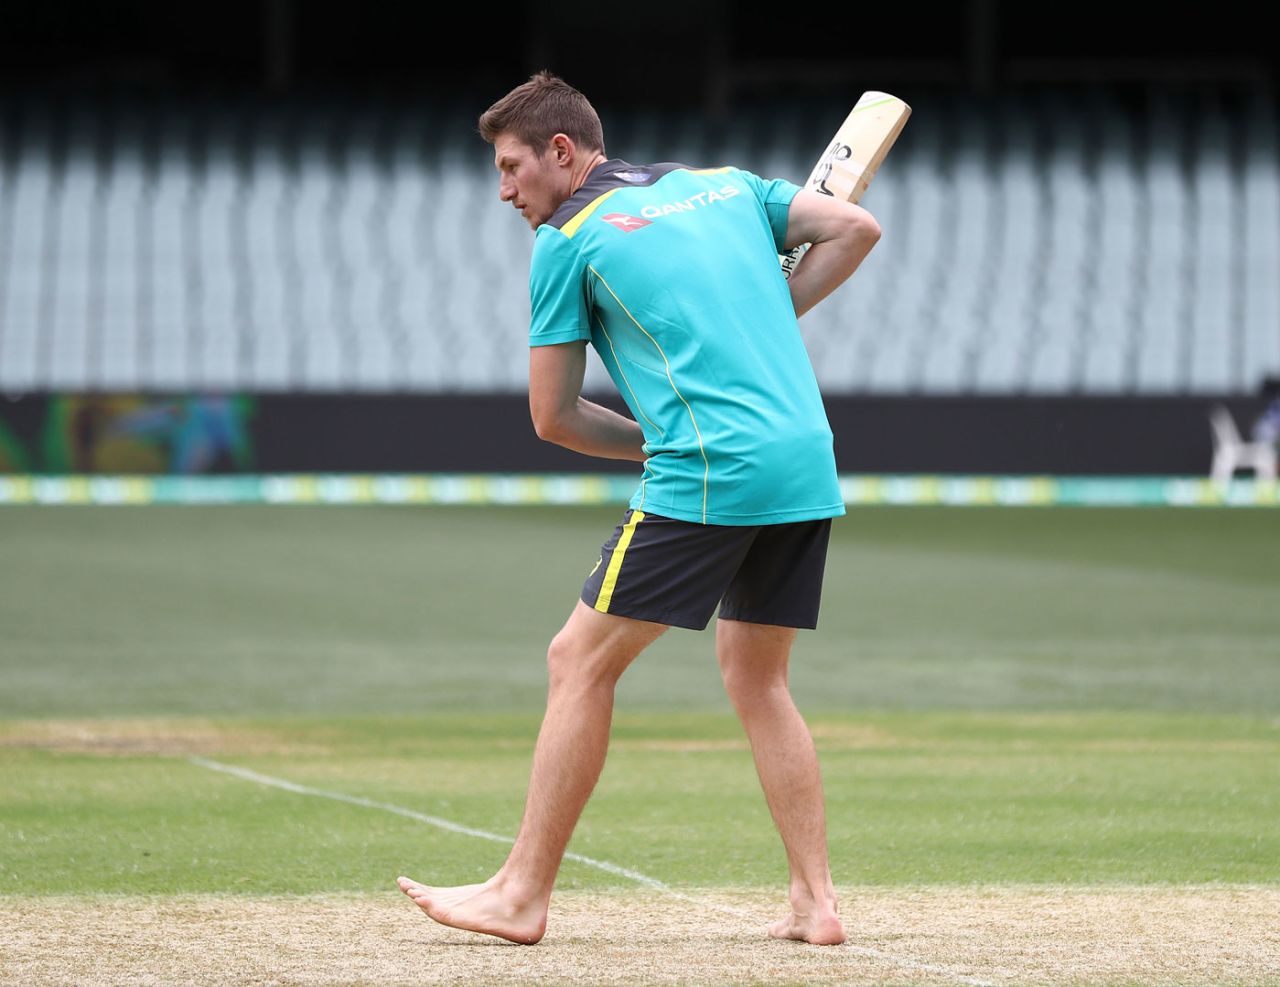 A barefoot Cameron Bancroft gets a feel for the pitch, Adelaide, December 1, 2017